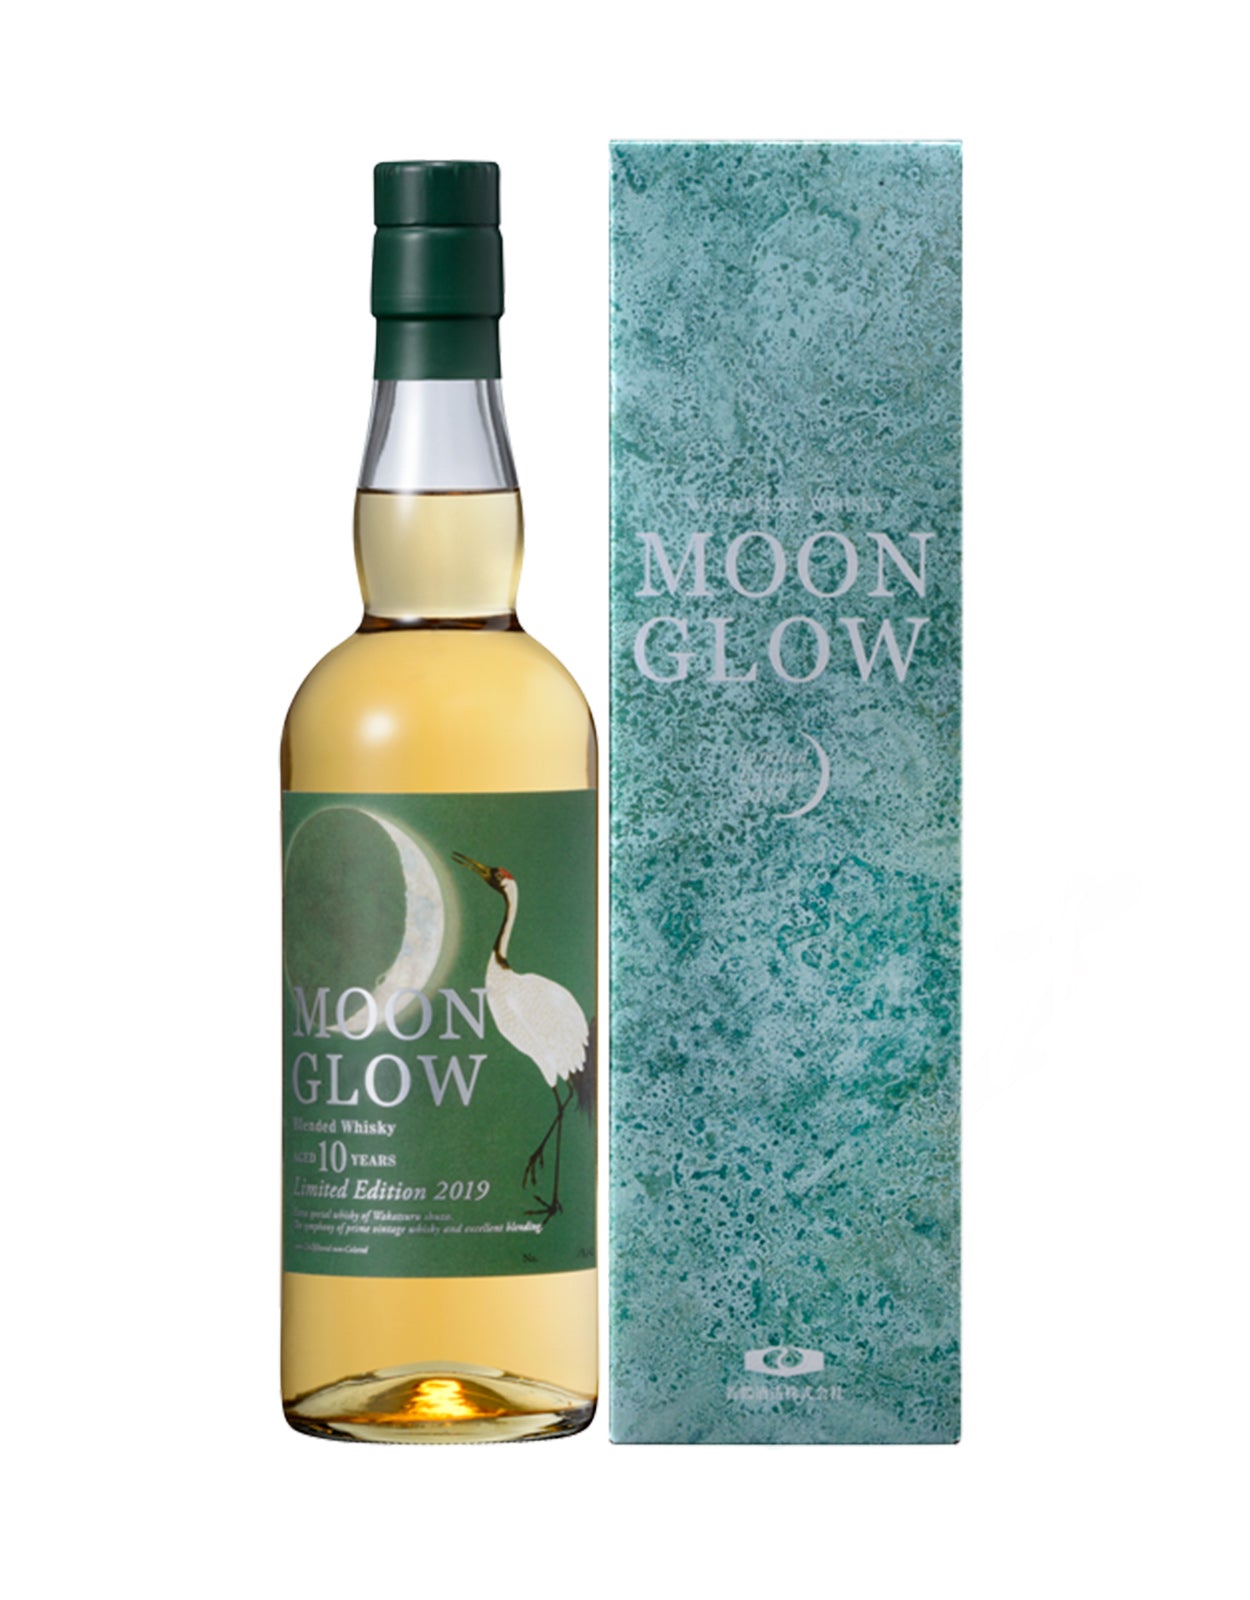 Moon Glow 10 Year Old Limited Edition 2019